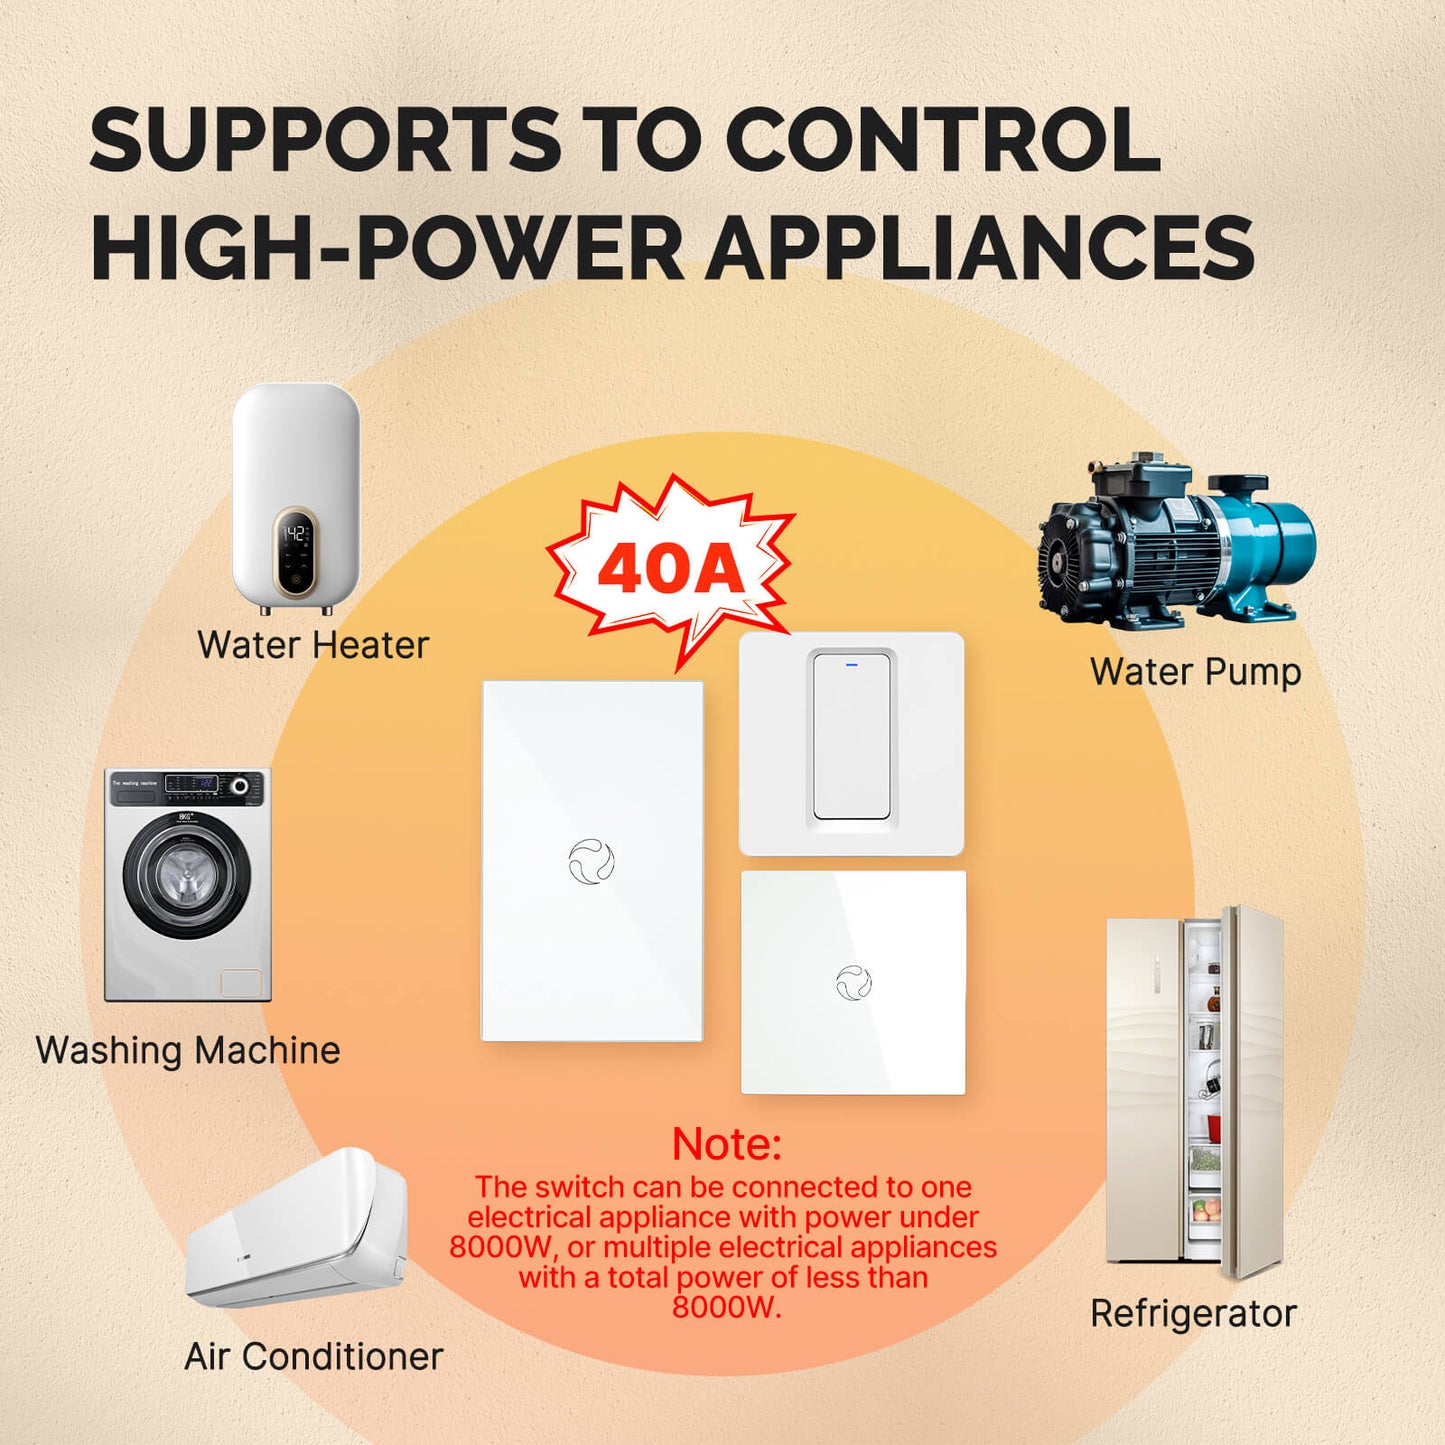 SUPPORTS TO CONTROL HIGH-POWER APPLIANCES - MOES